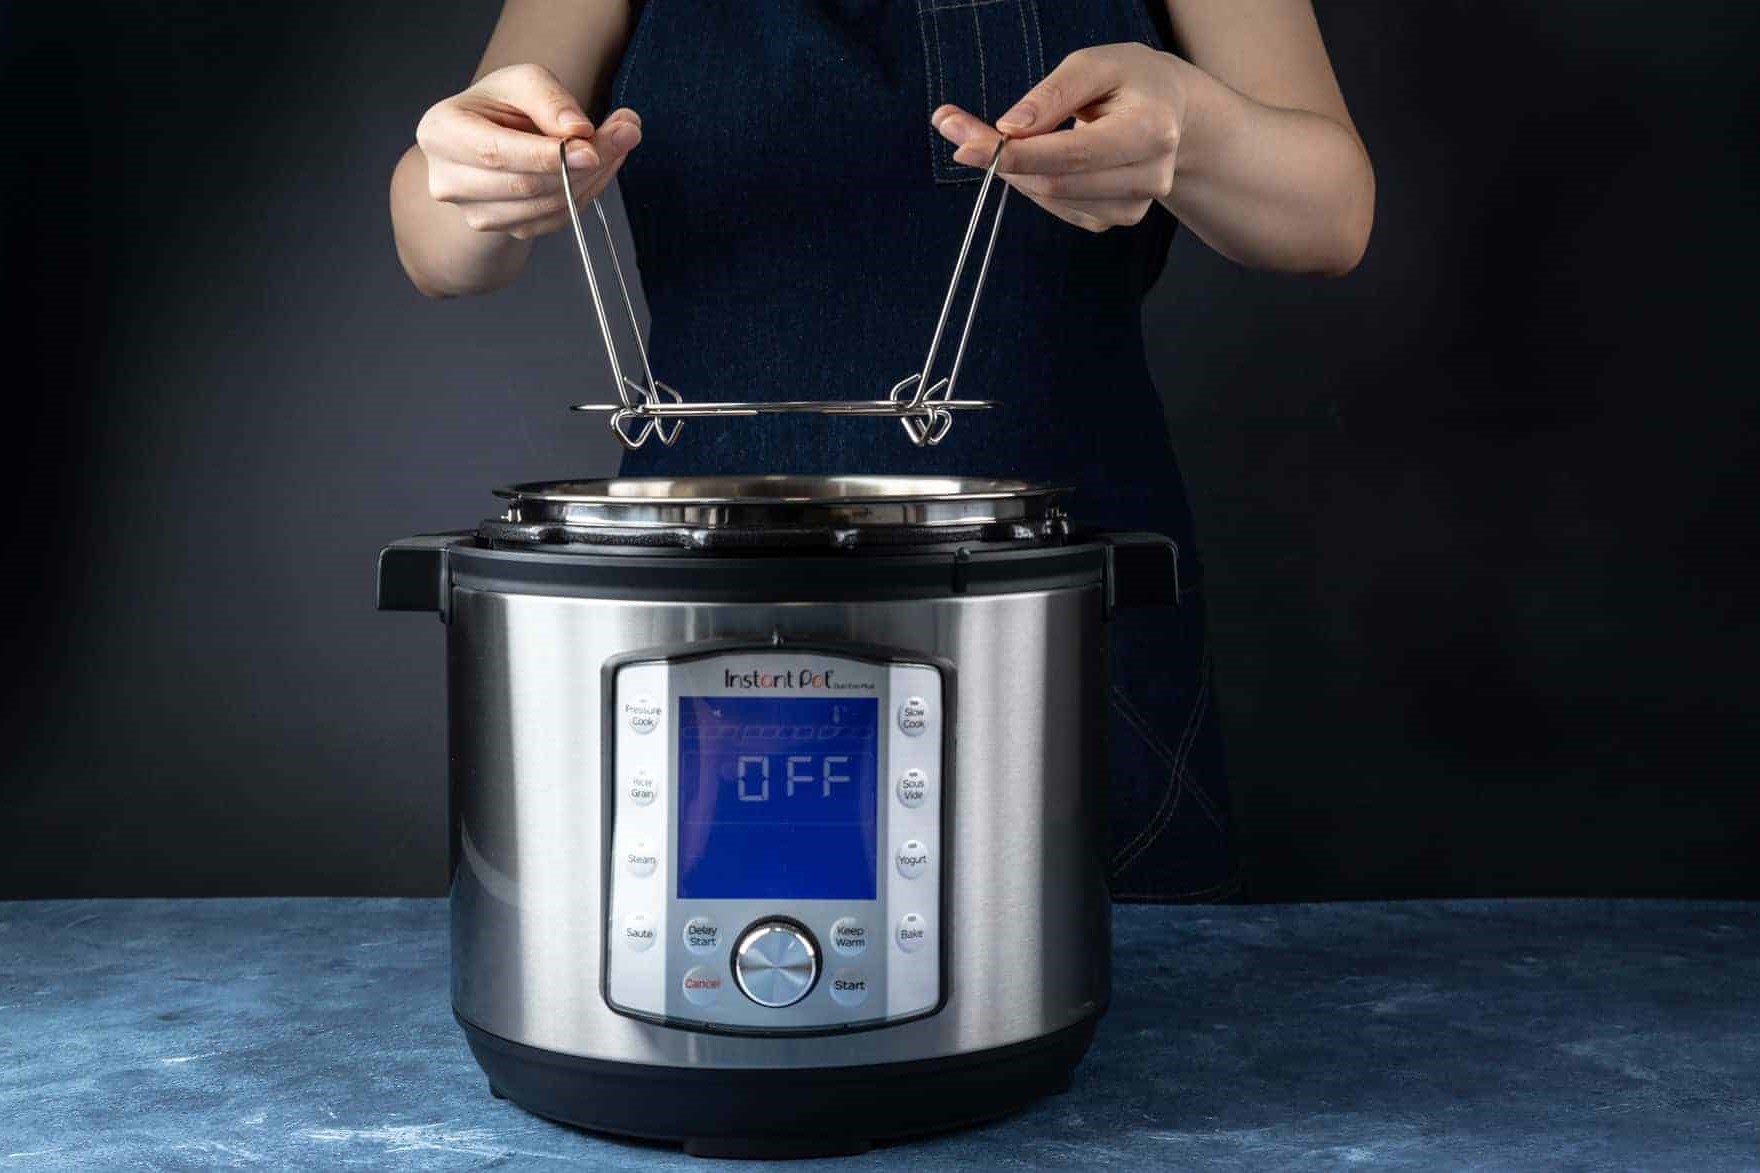 Master The Art Of Steaming In An Instant Pot With These Genius Tips!